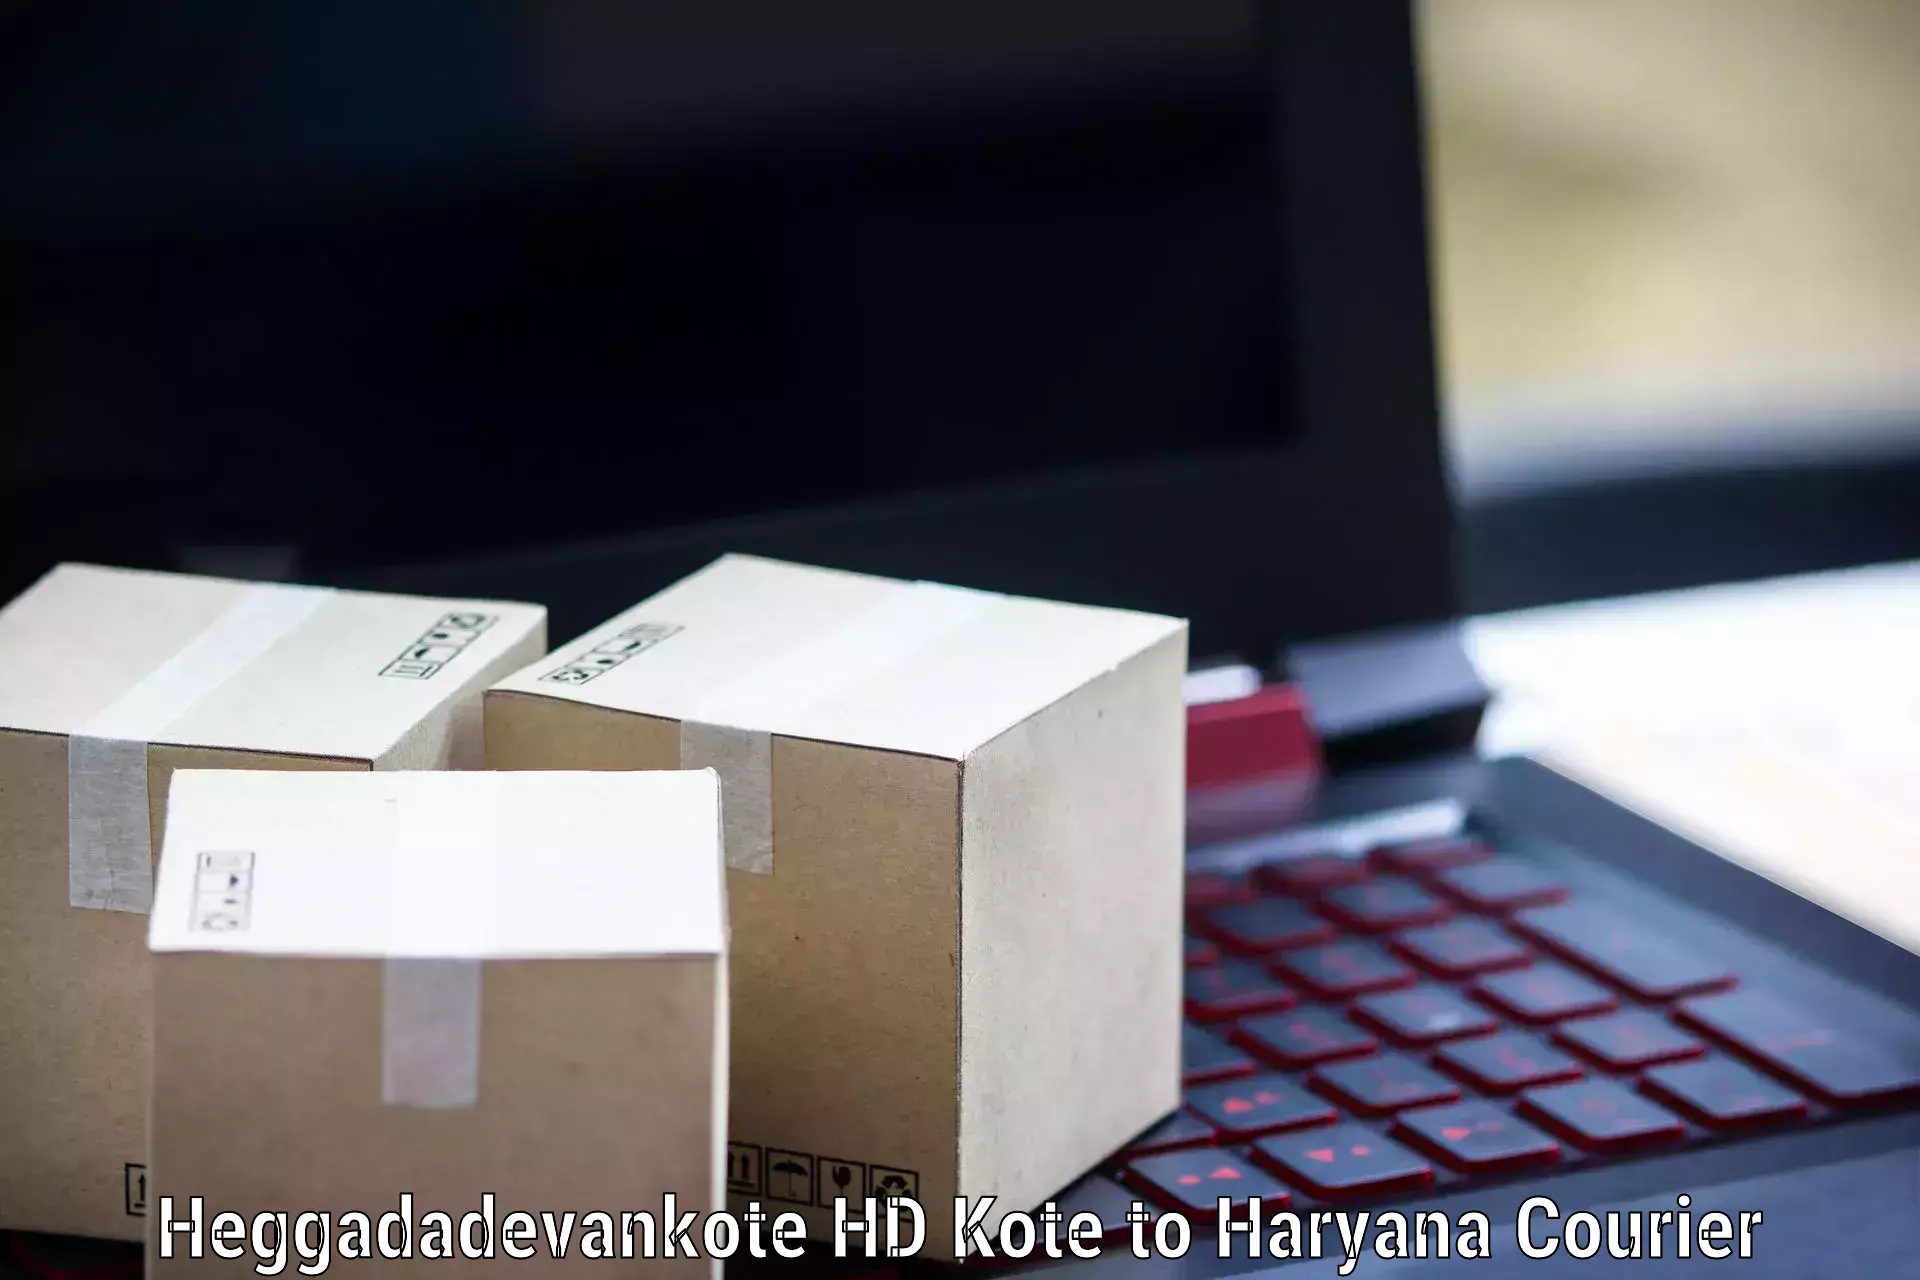 Express package delivery Heggadadevankote HD Kote to Sonipat